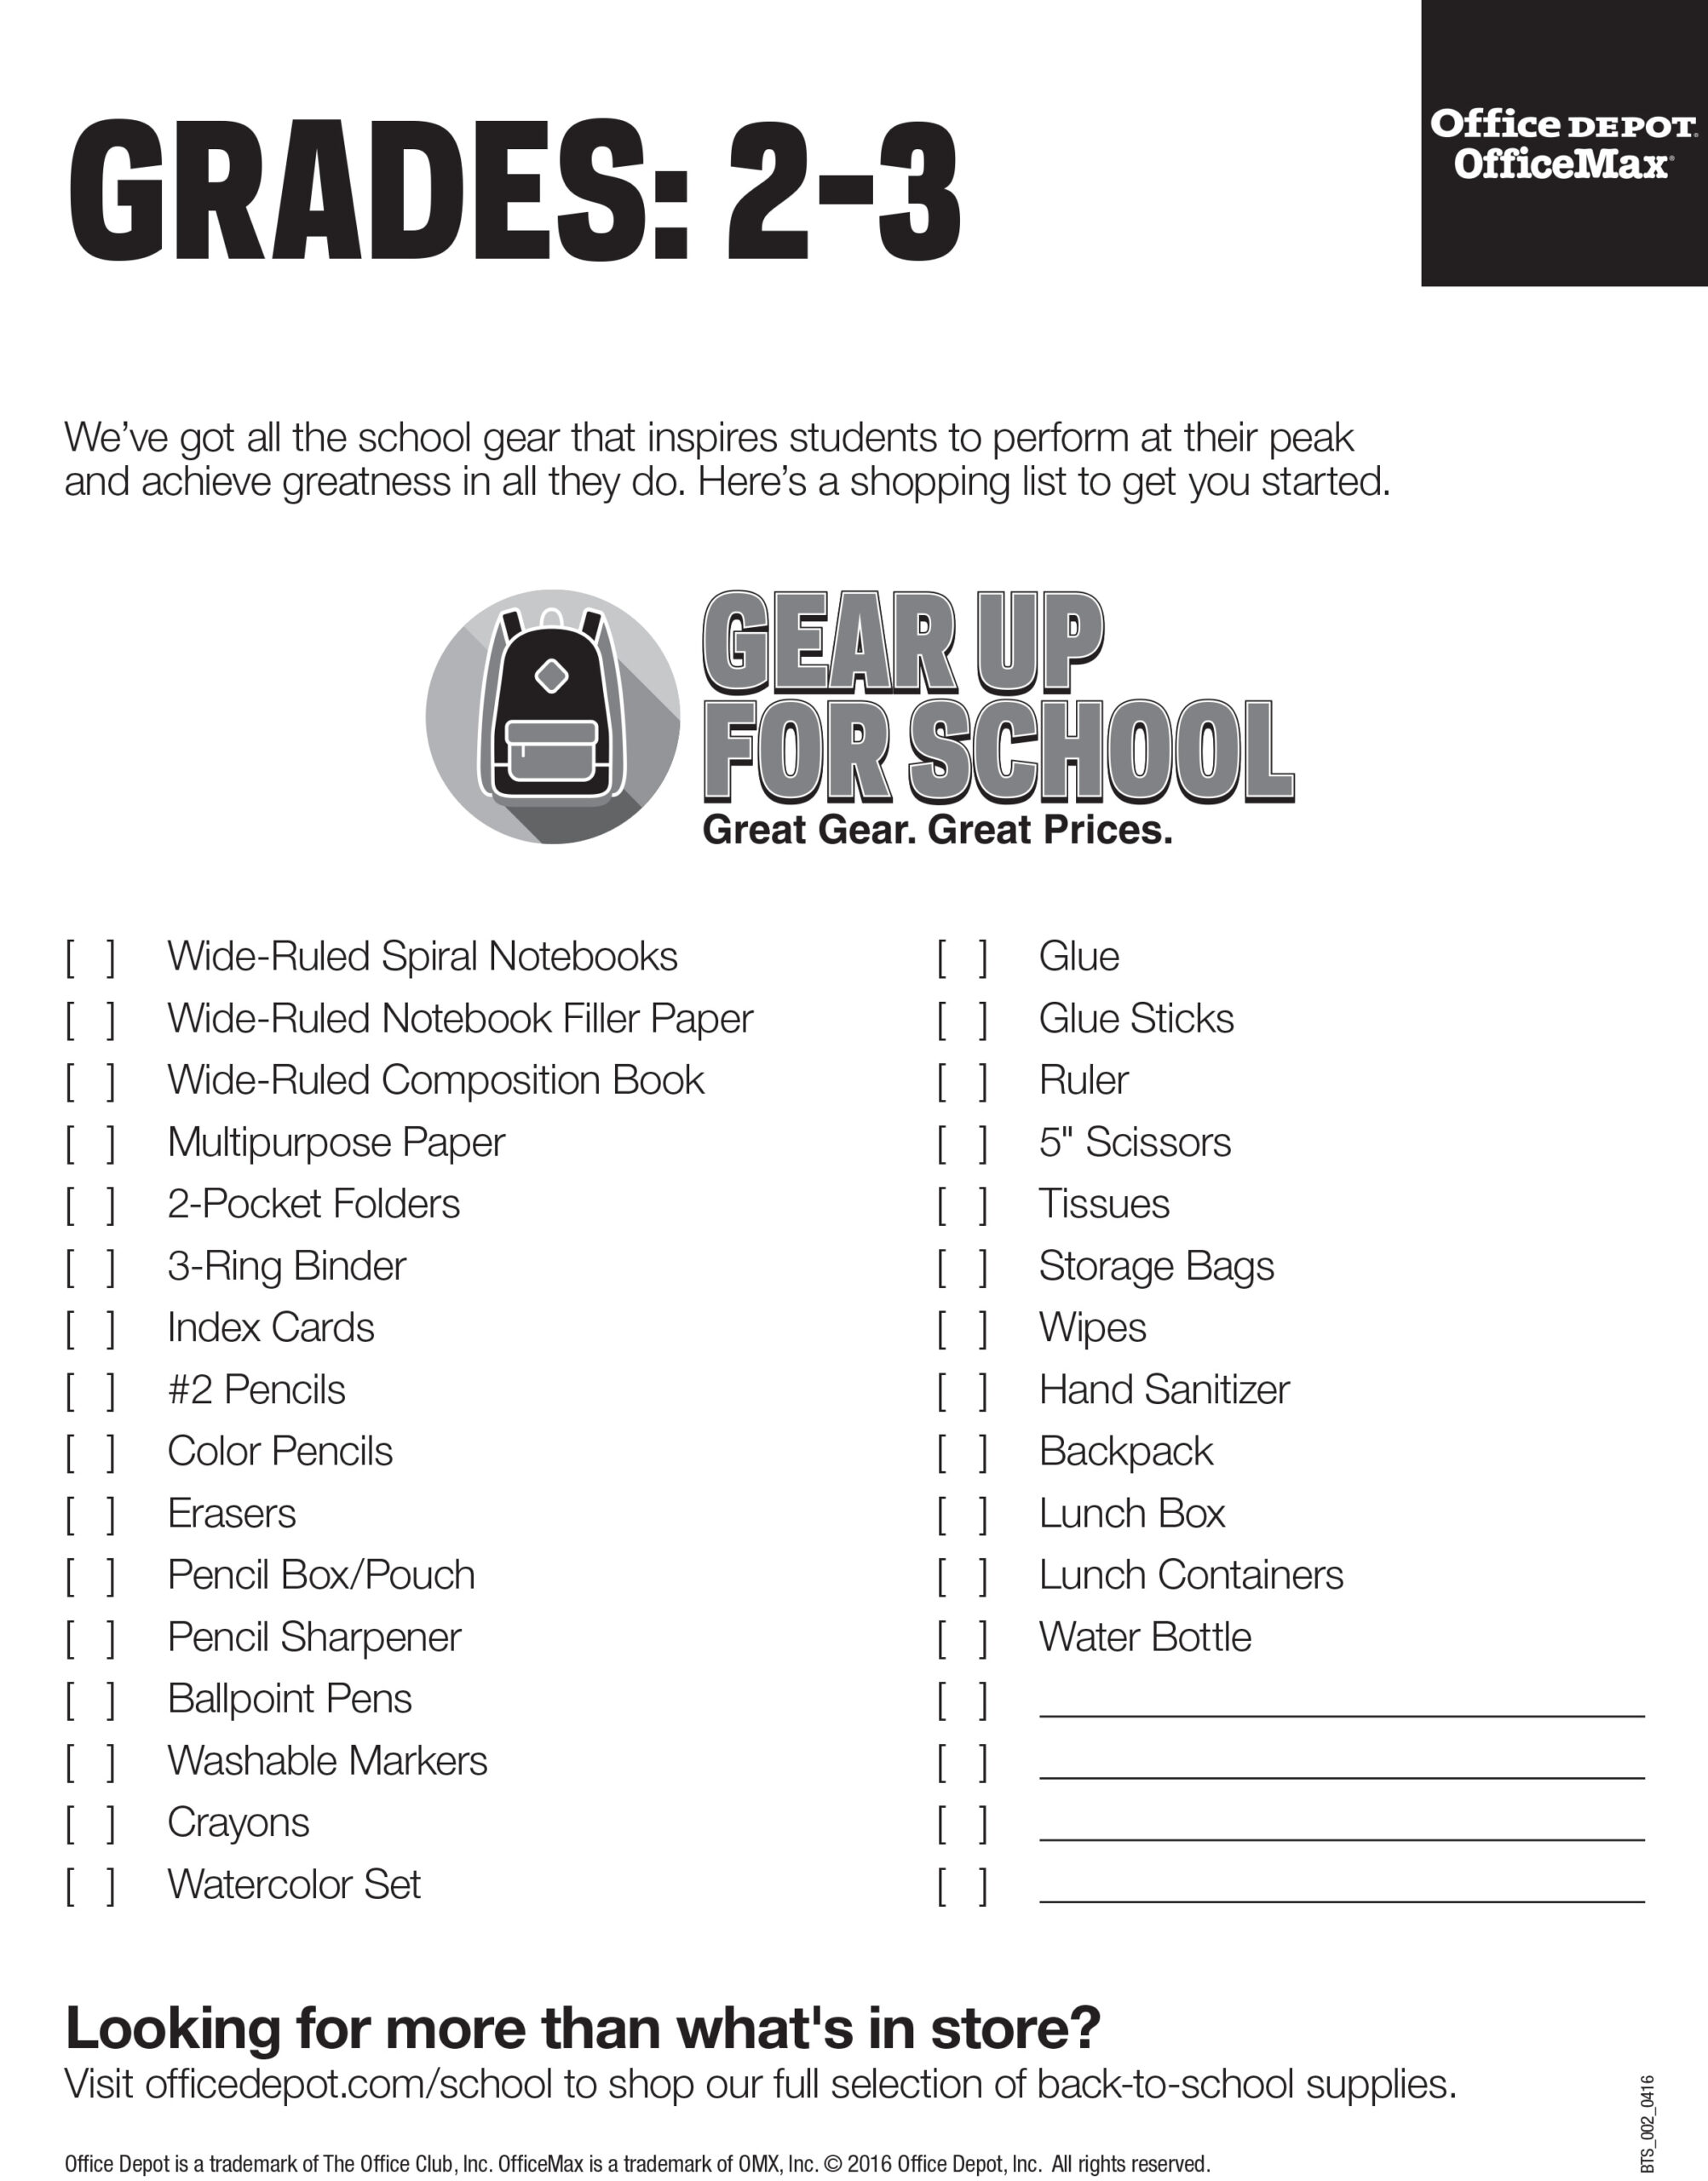 School Supply List Grades 2 3 With Office Depot Business Card Template